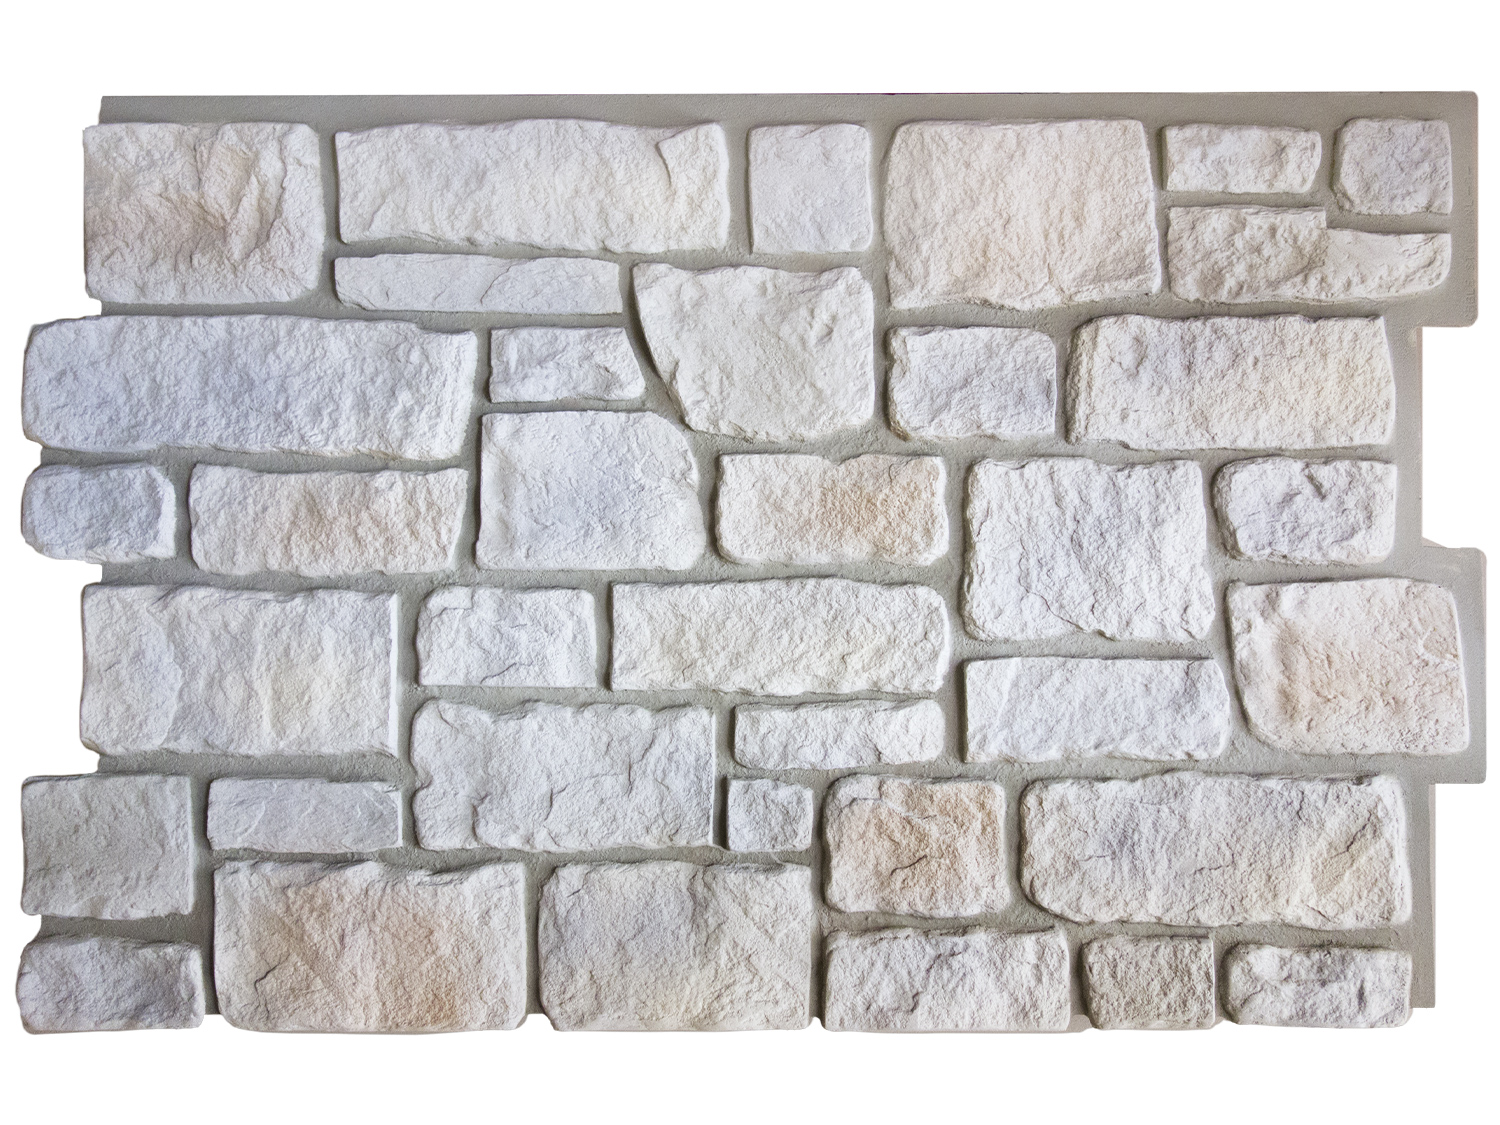 How many panels of Hampton cobblestone would I need for a fireplace  5feet wide 12 feet heighand12inchesof depth